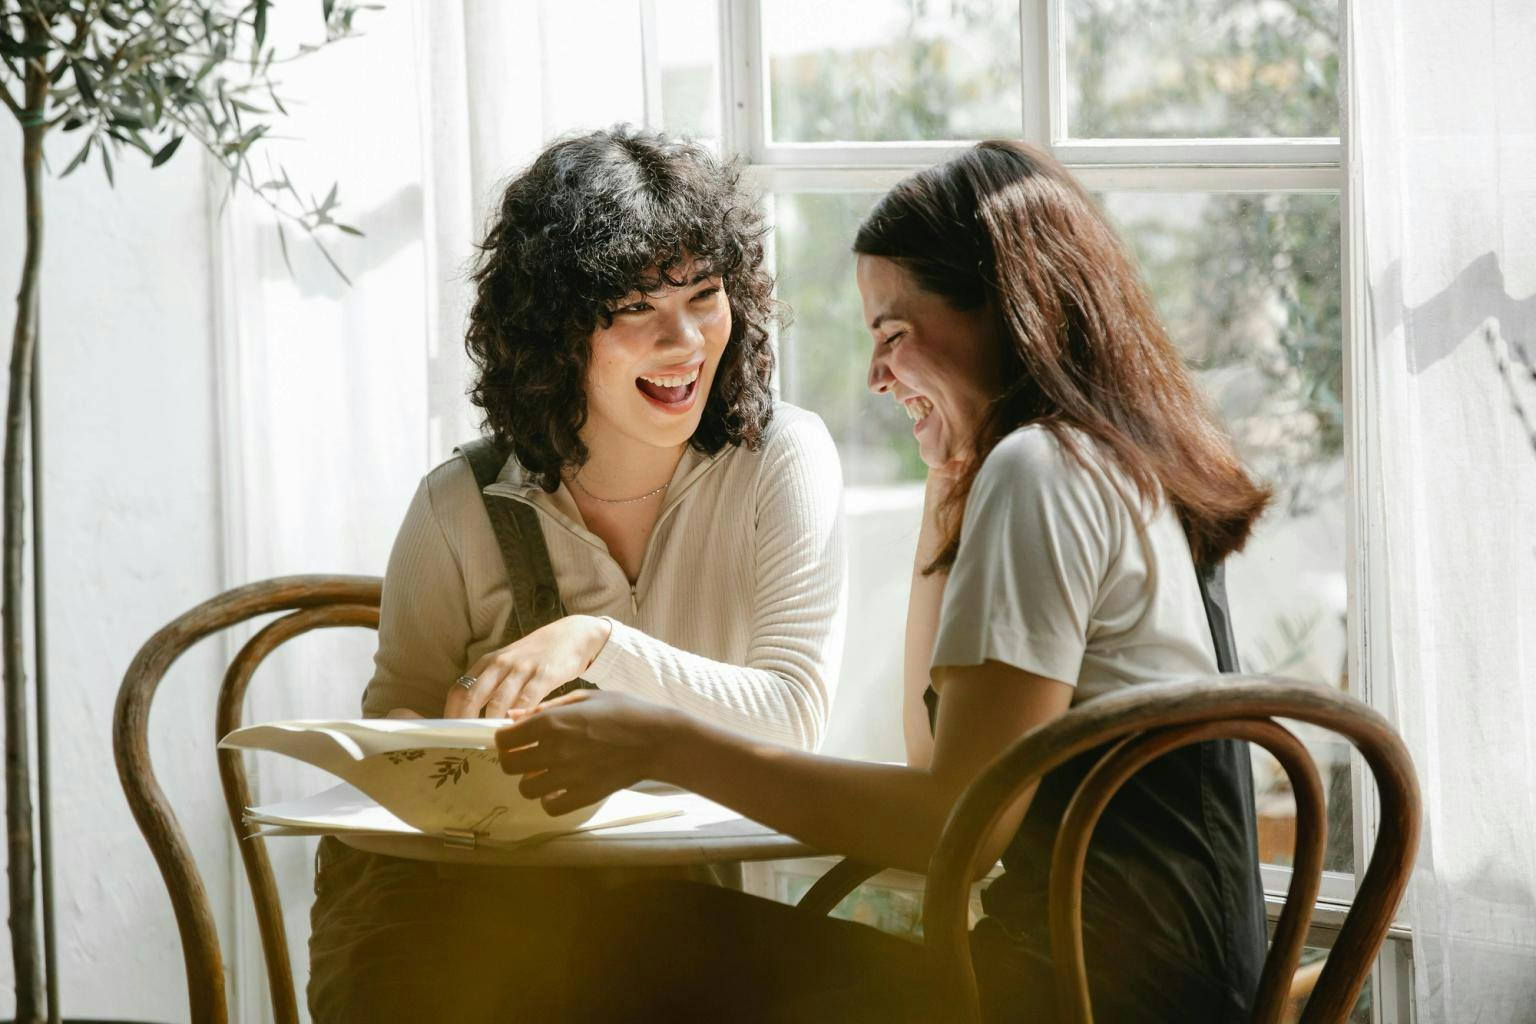 Two women sit at a table in a window looking through a document and smiling together